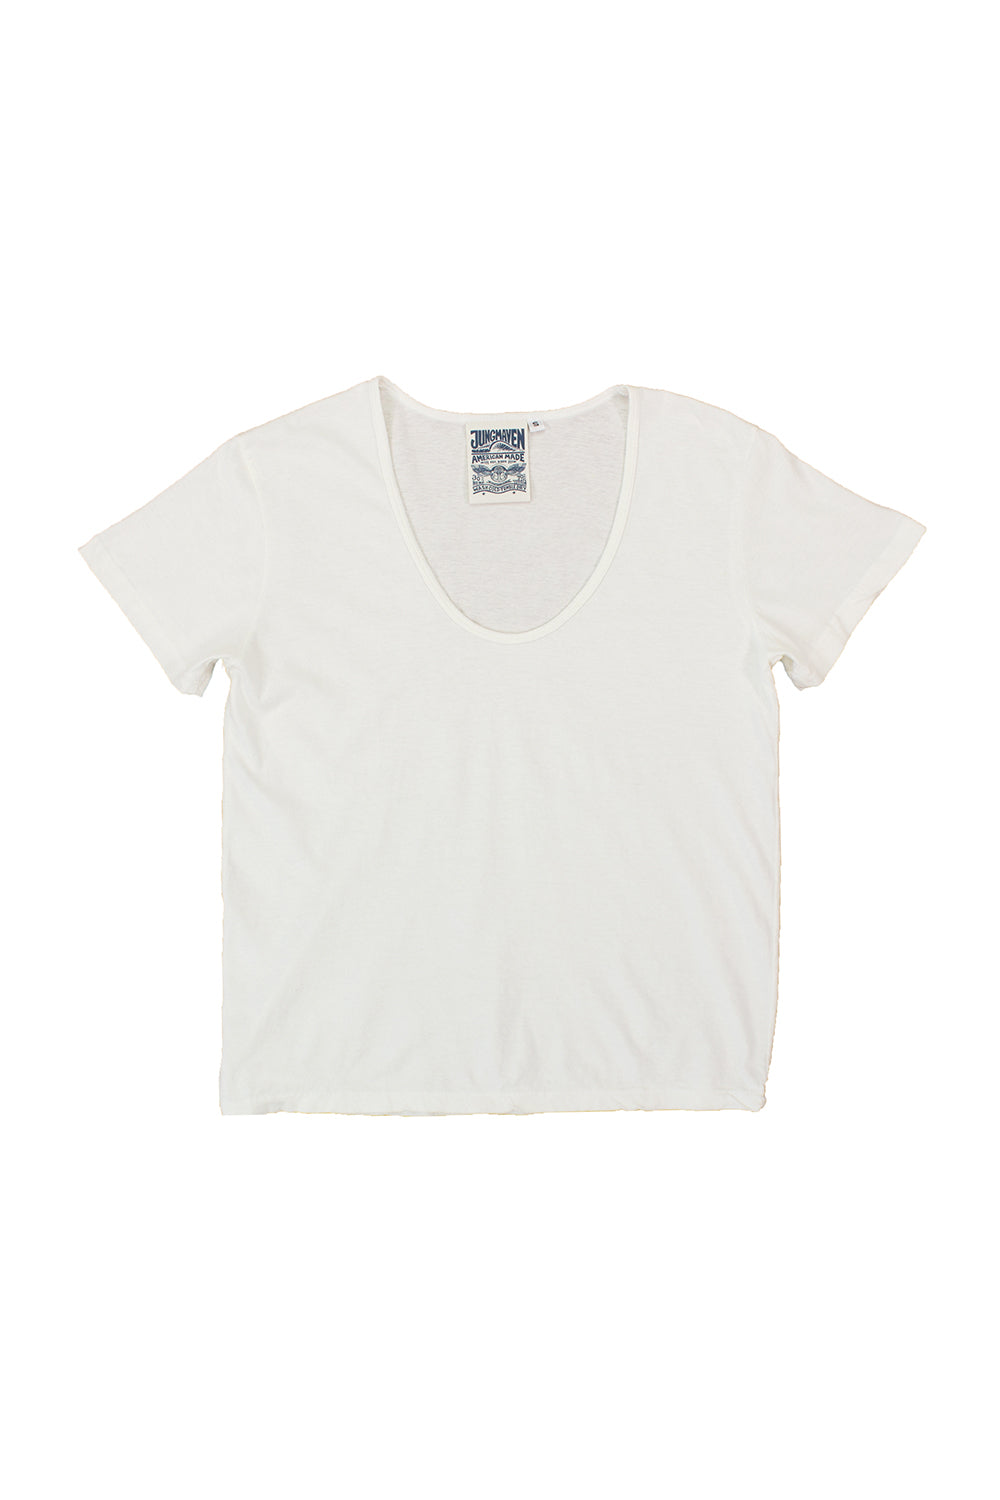 Zuma Scoop Neck Tee | Jungmaven Hemp Clothing & Accessories / Color: Washed White